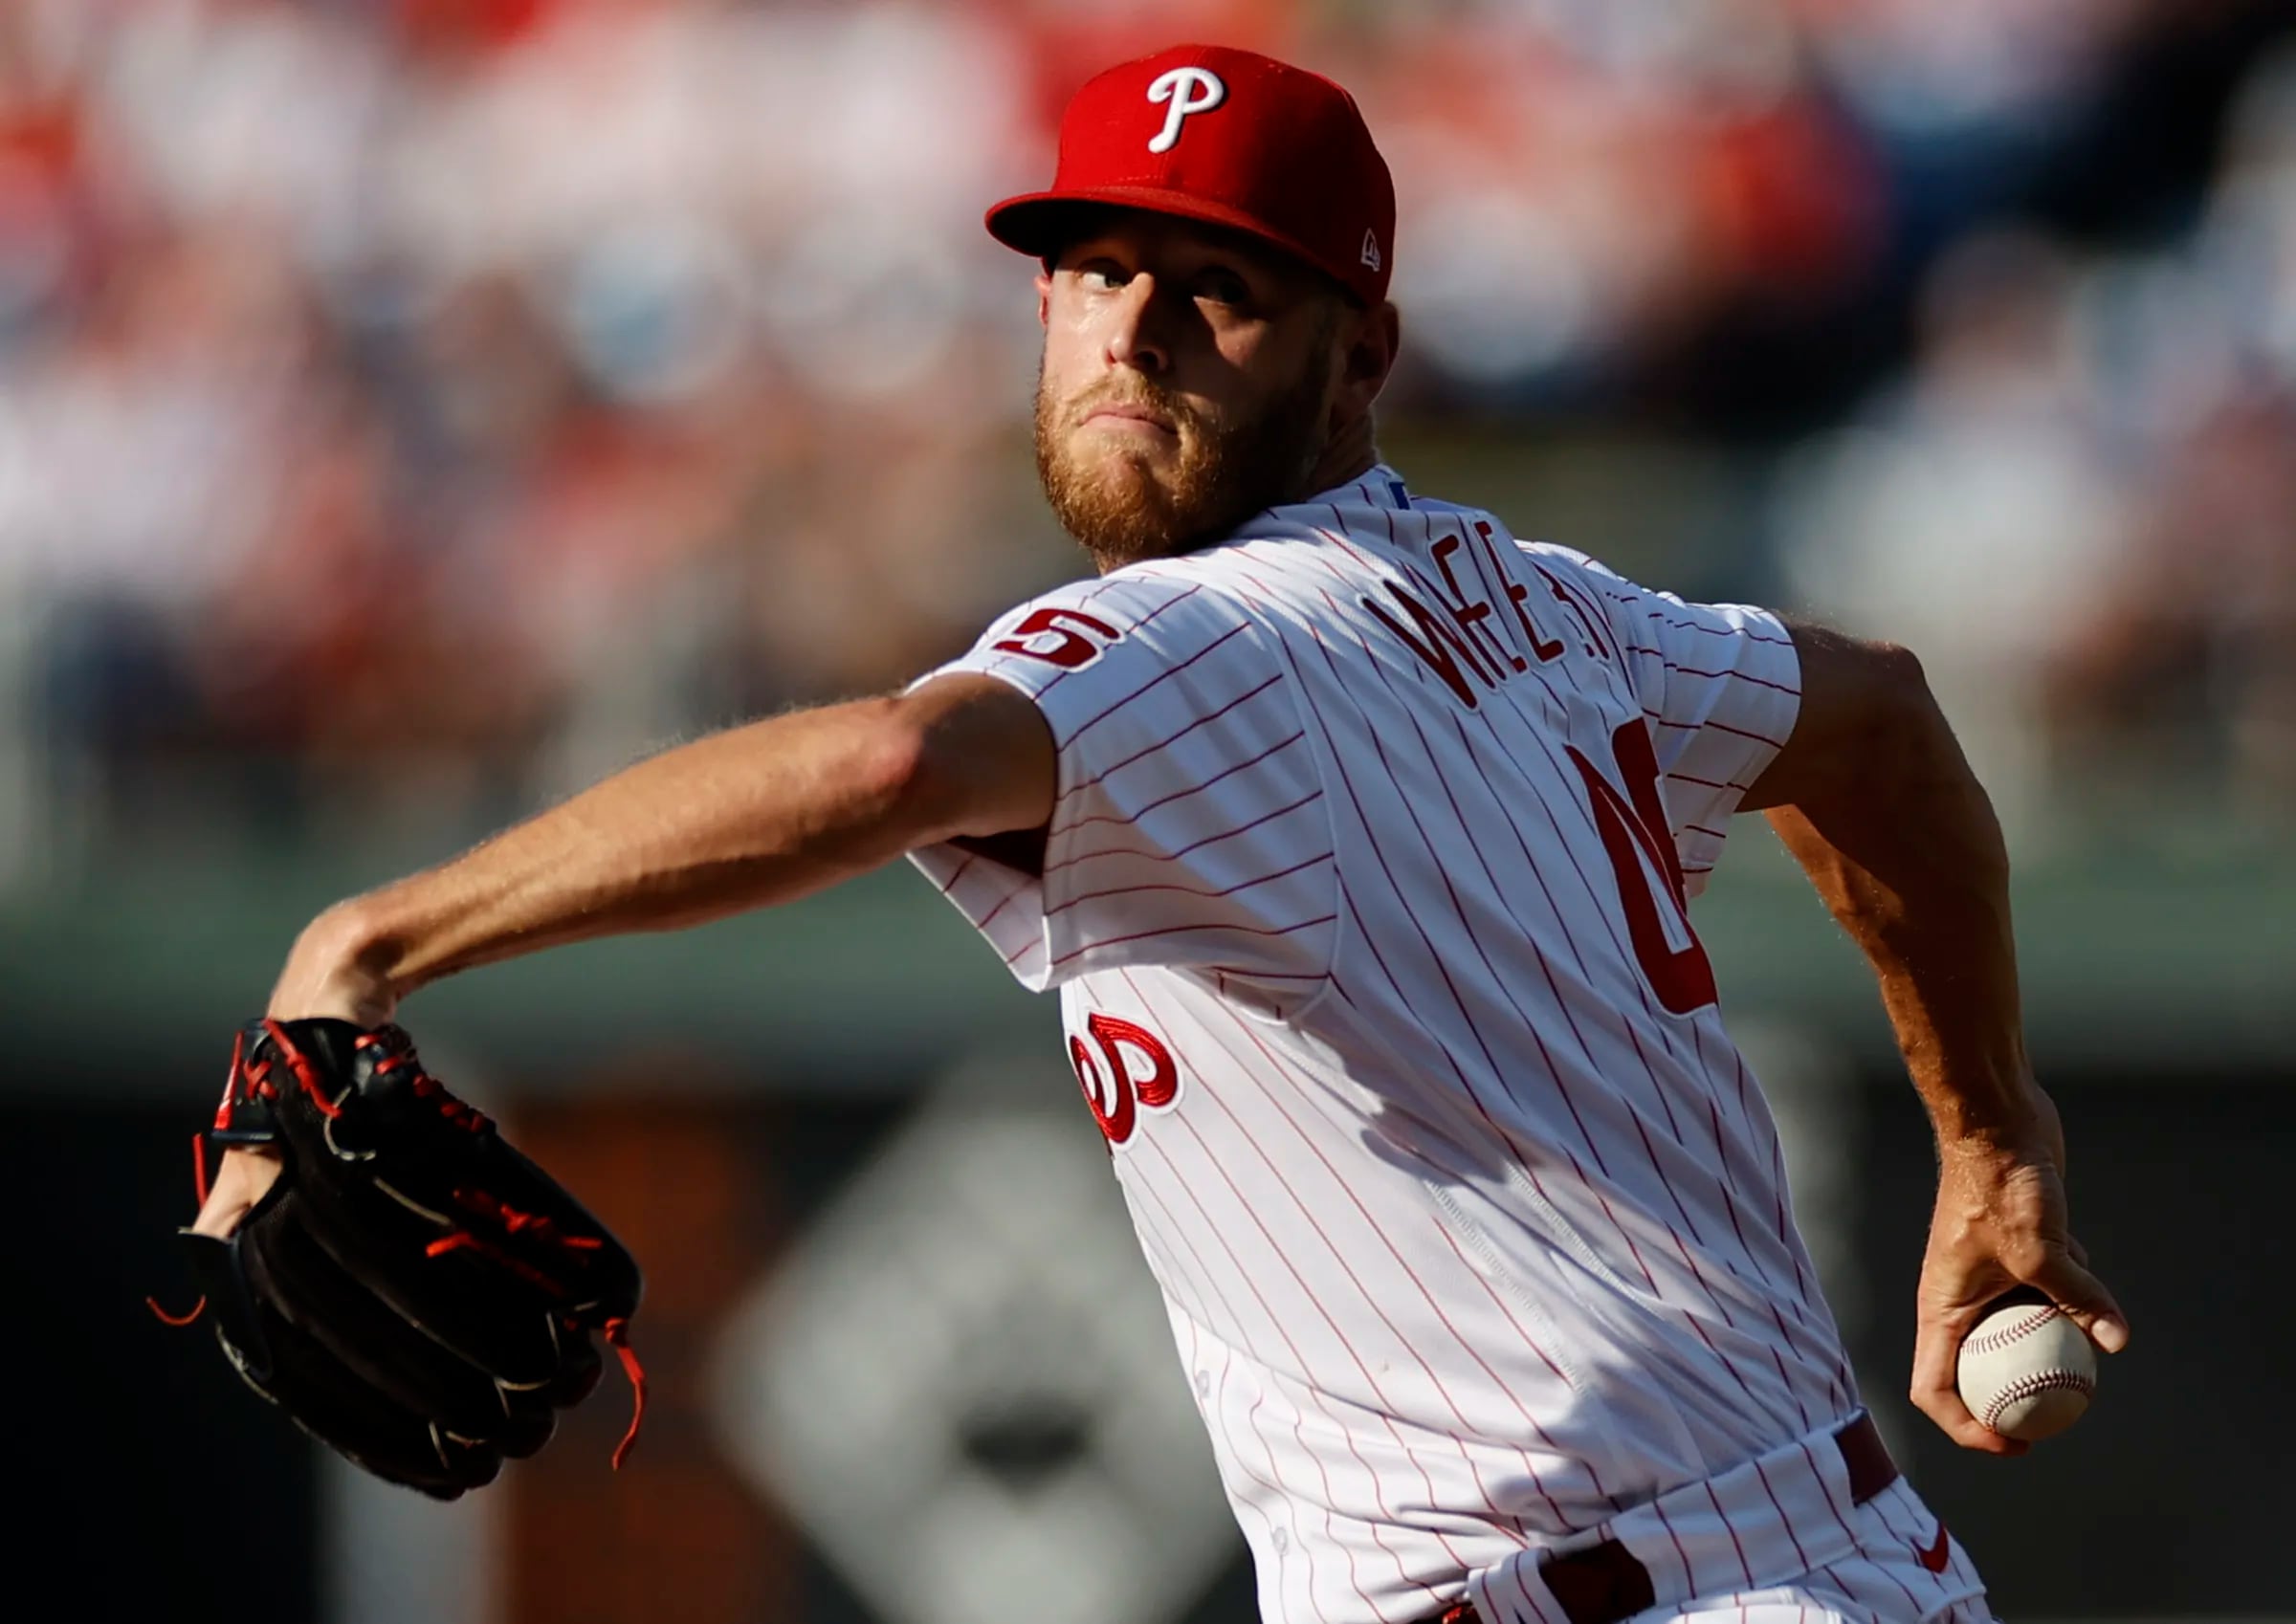 Photos from the Phillies extra innings loss to the Cubs